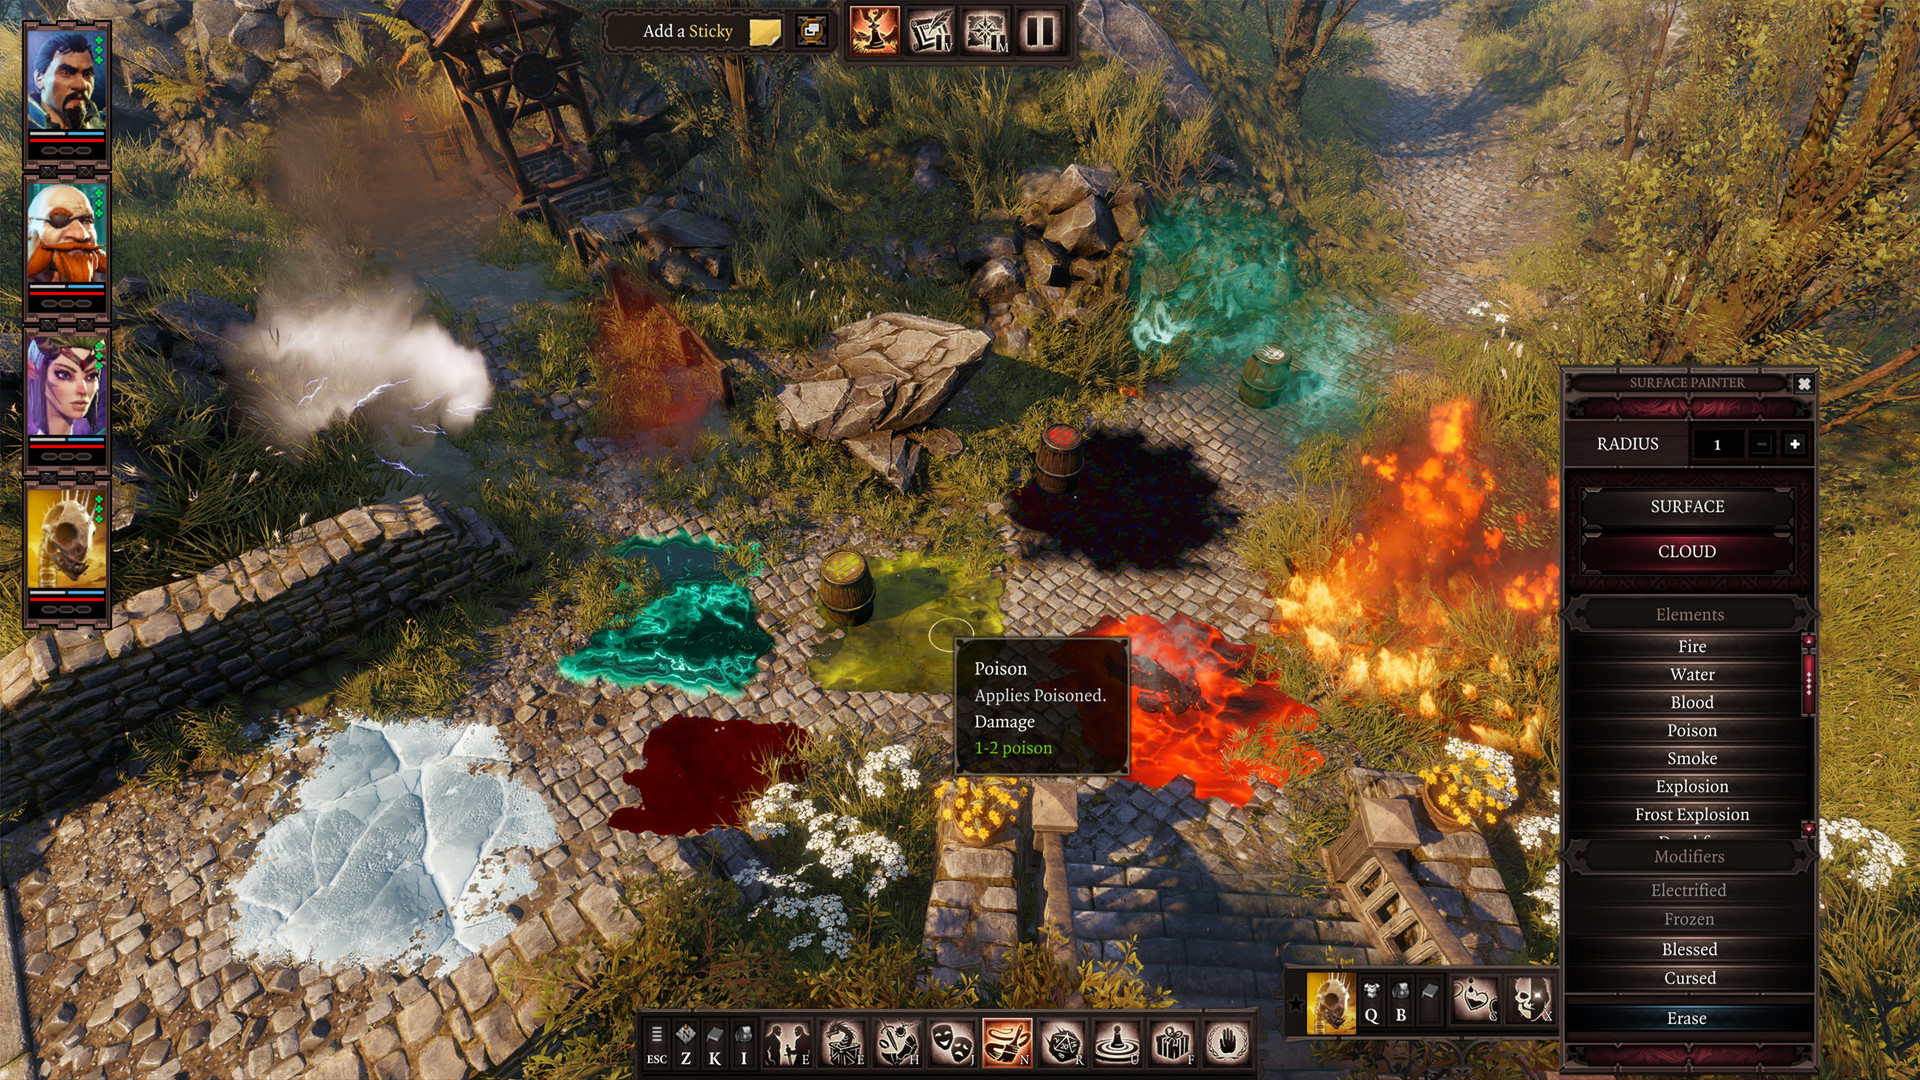 A party of custom characters in divinity Original Sin 2 casting magic spells on the ground